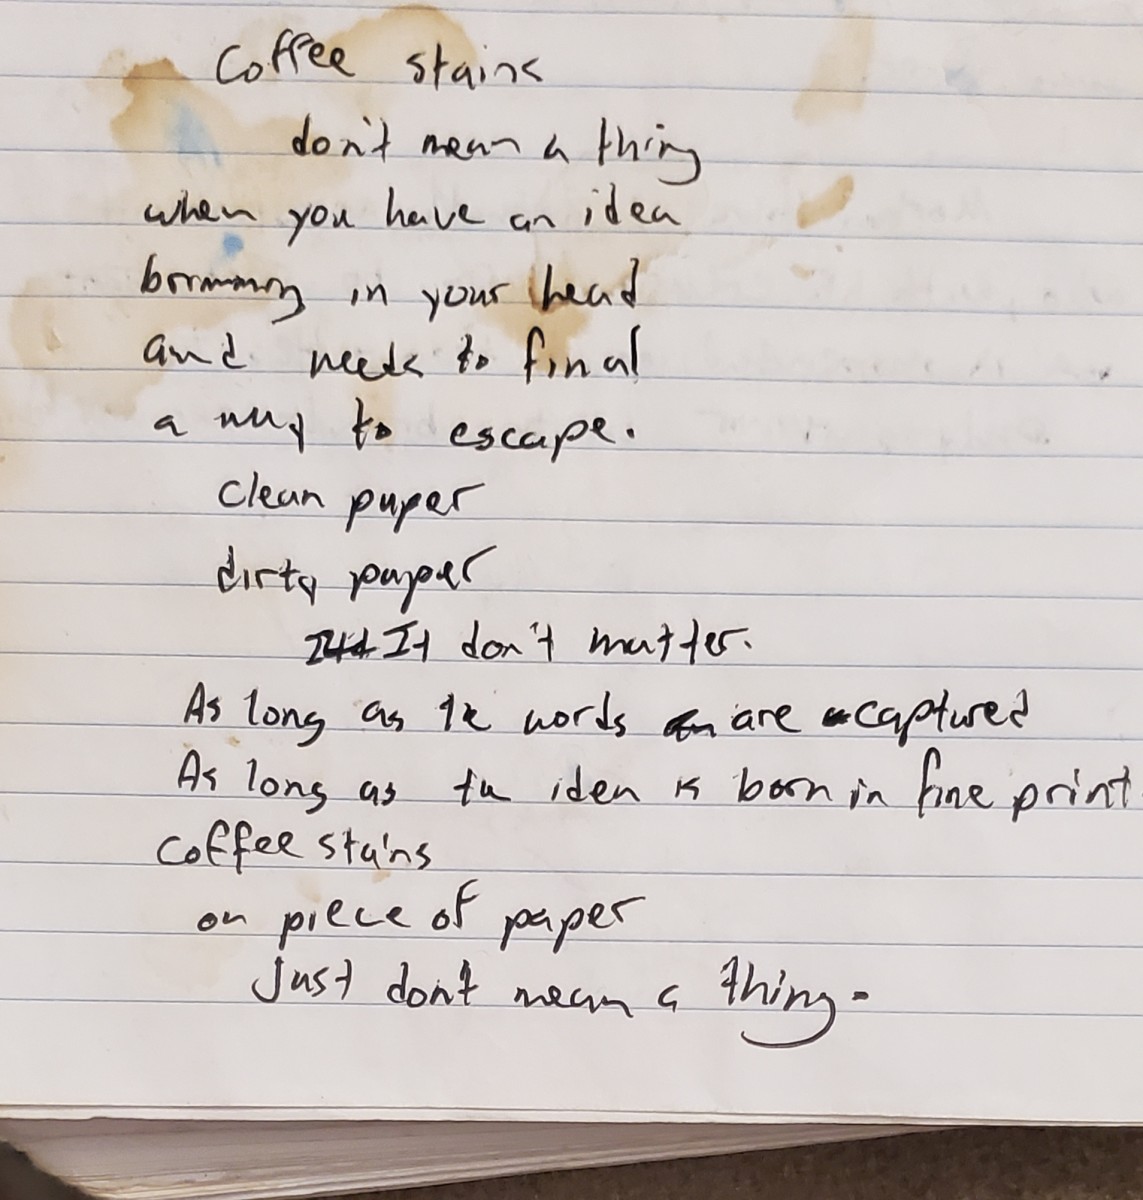 Coffee Stains in a Notebook